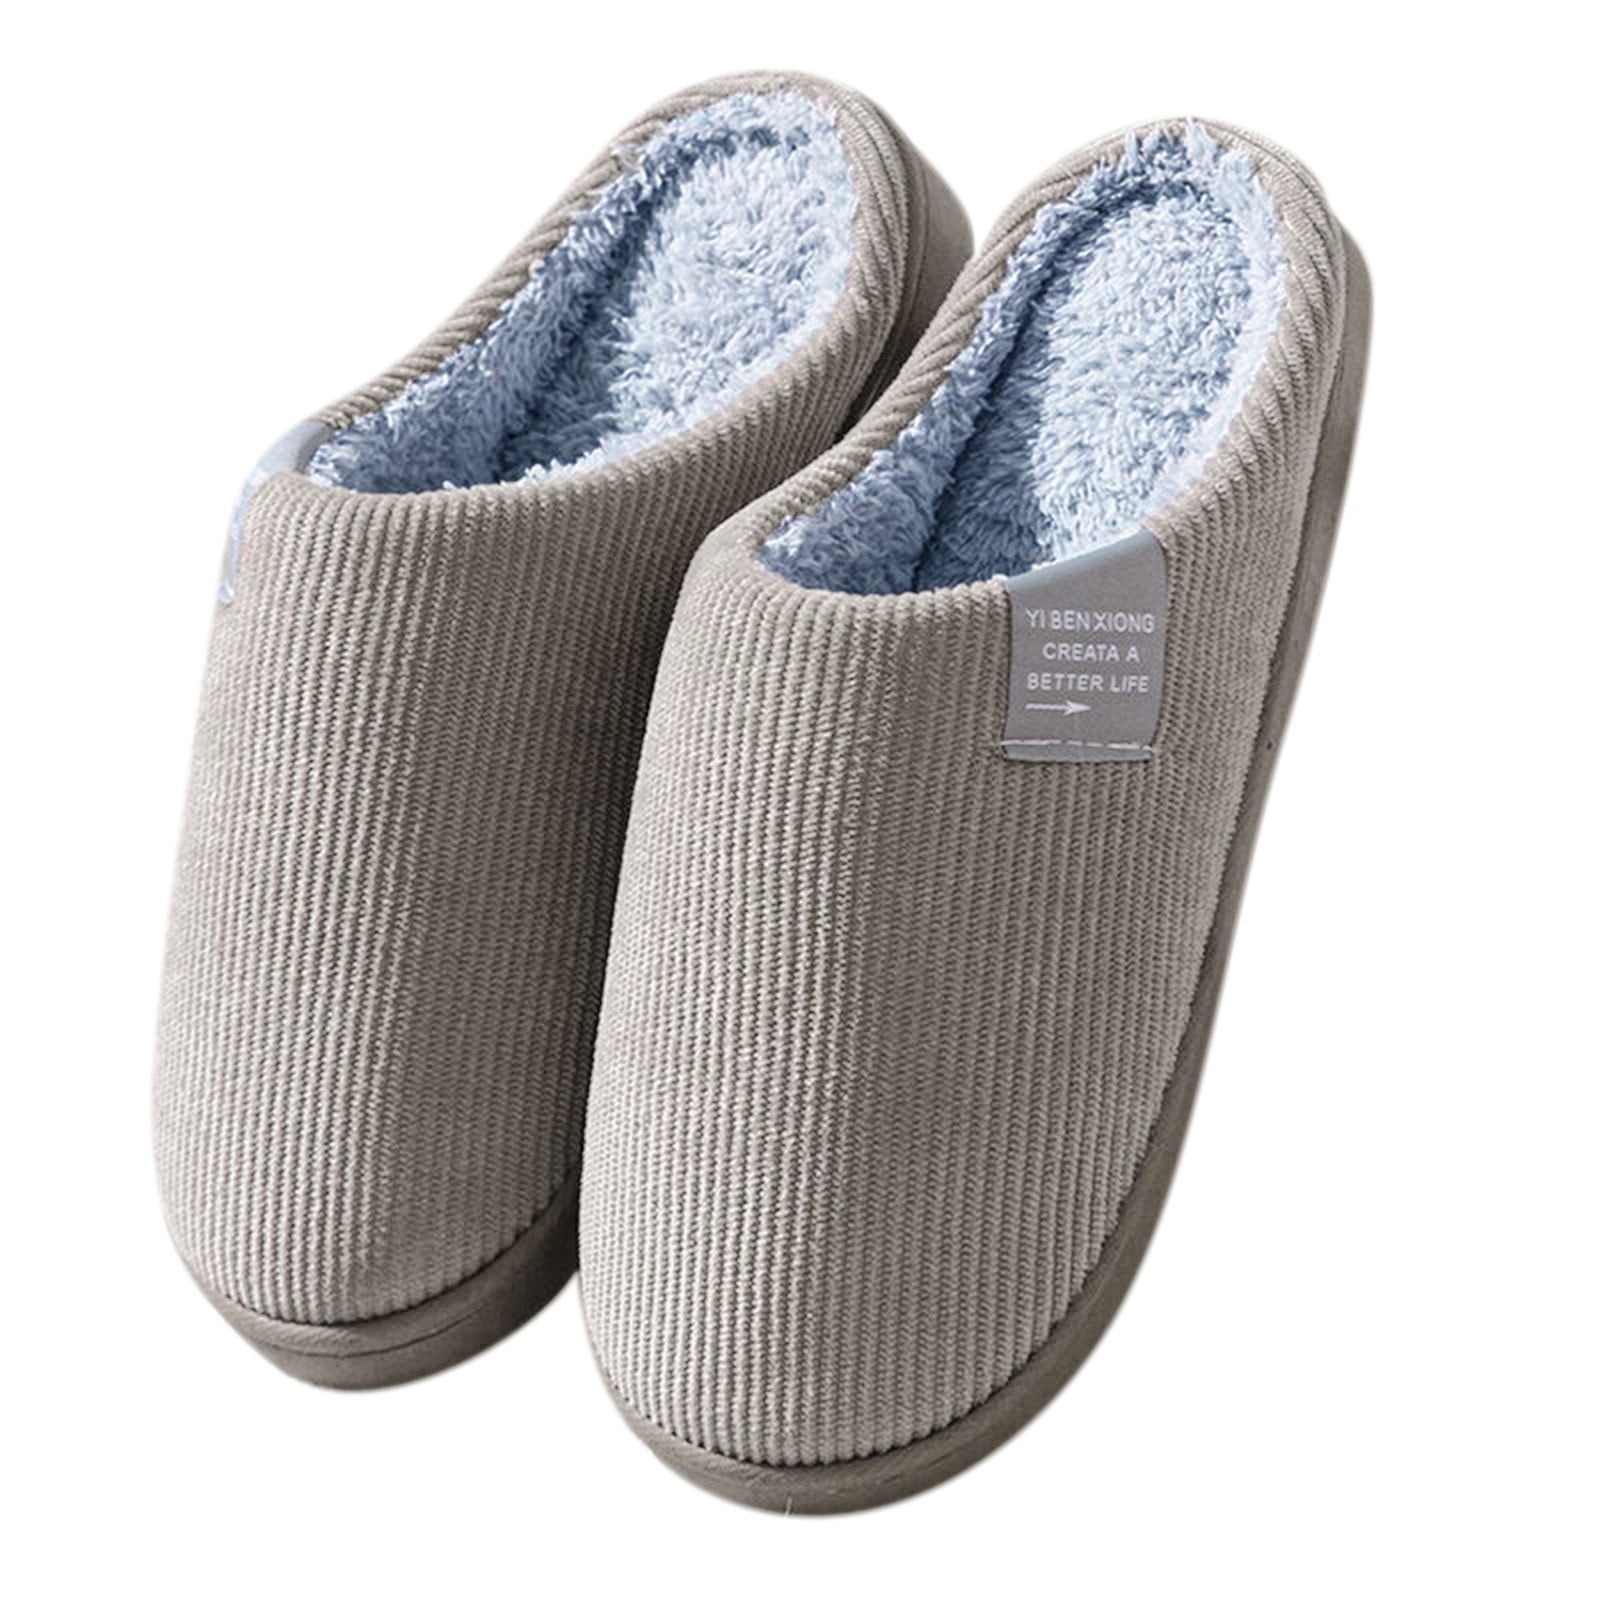 ActionHeat 5V Battery Heated Slippers - The Warming Store